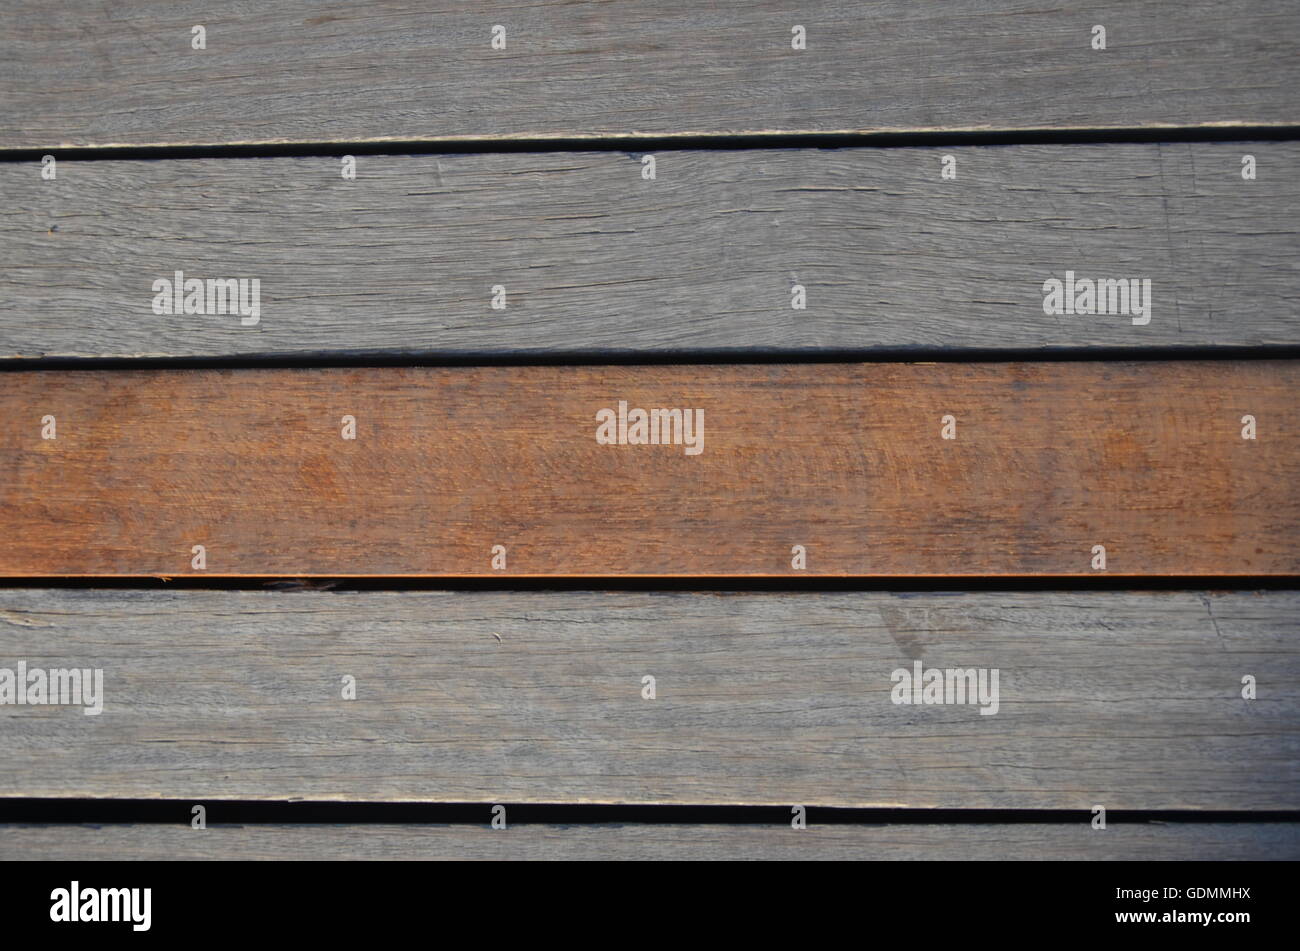 Wood - Material, Backgrounds, Textured, Material, Rustic, Plank, Dark, Timber, Retro Styled, Pattern, Wood Paneling, Brown Stock Photo